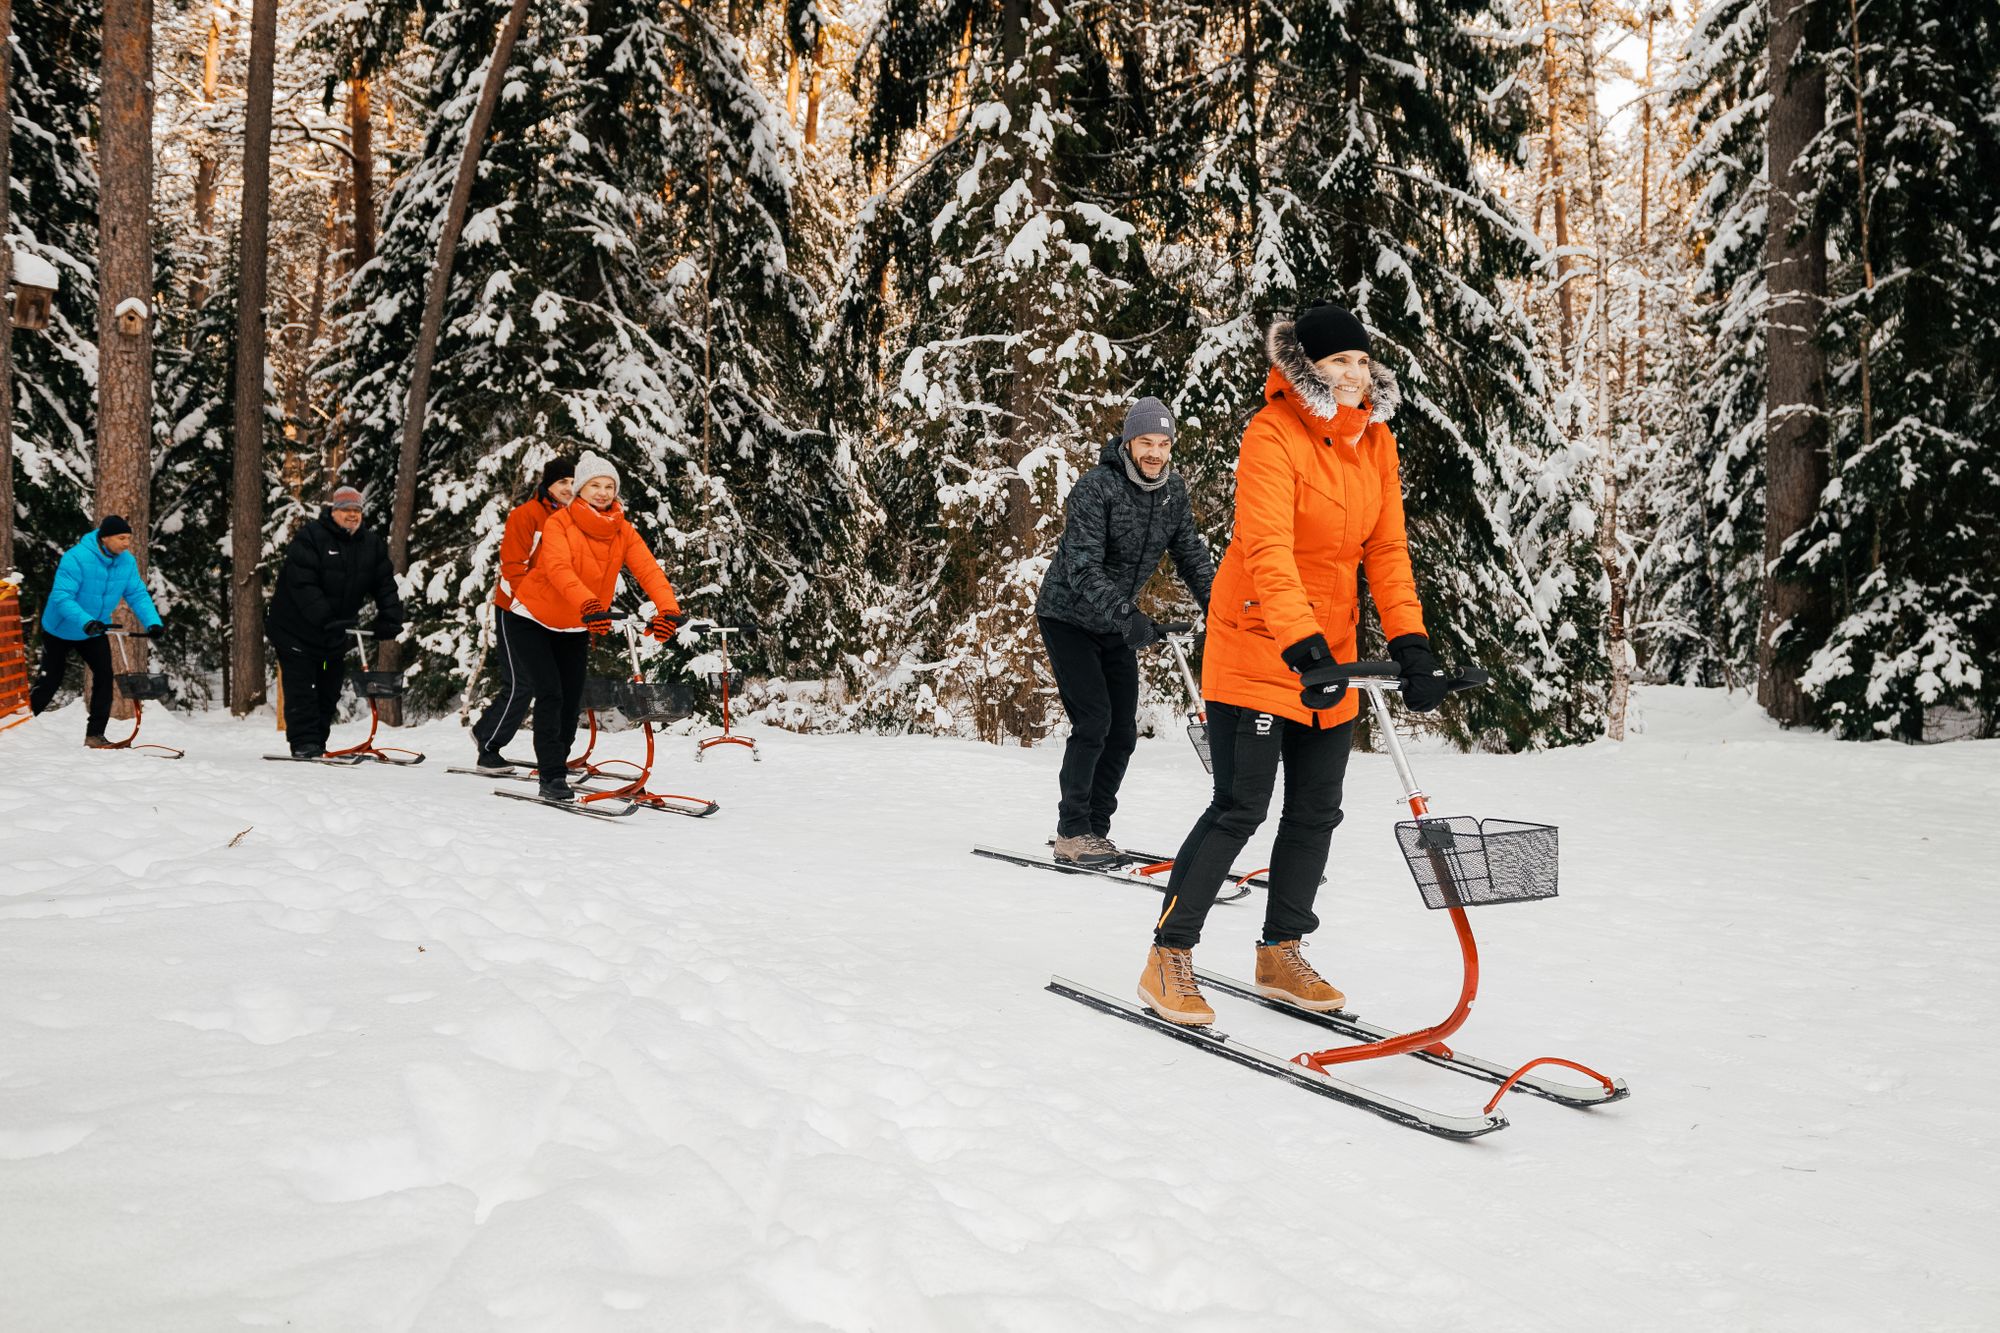 People gliding across the snow, backed by forest, on kicksleds in Estonia.